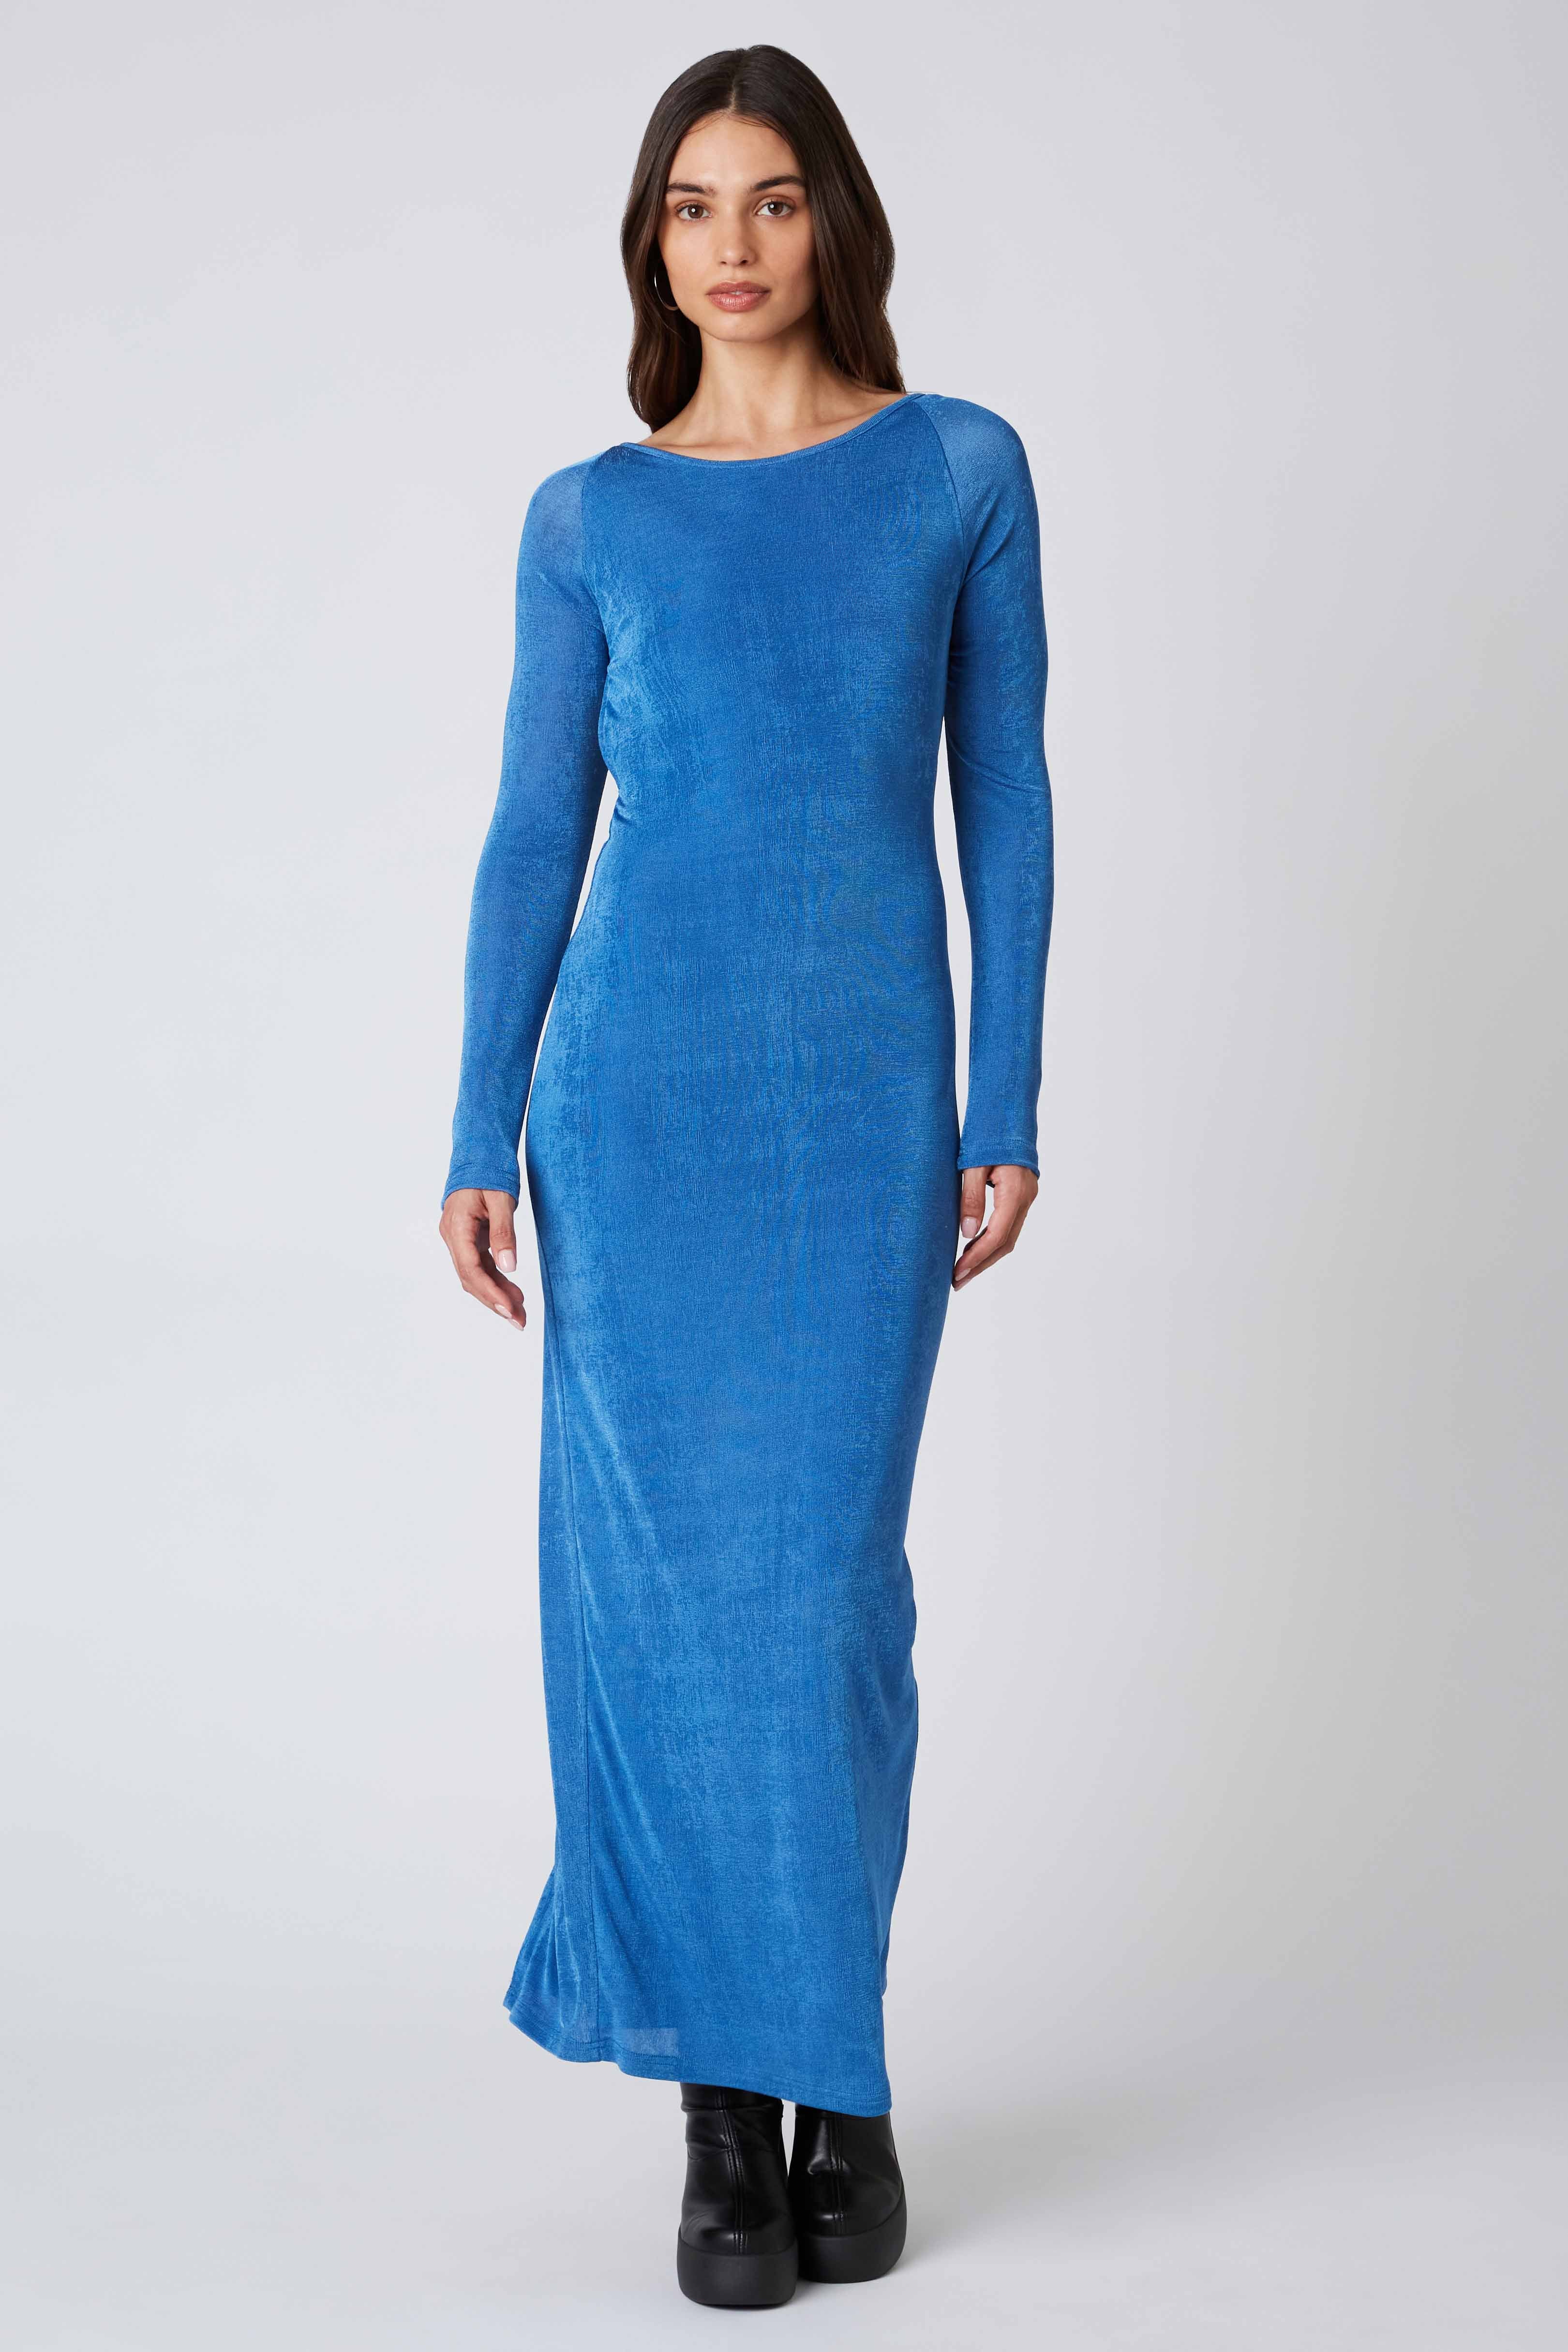 Long Sleeve Maxi Dress in Marine Blue Front View